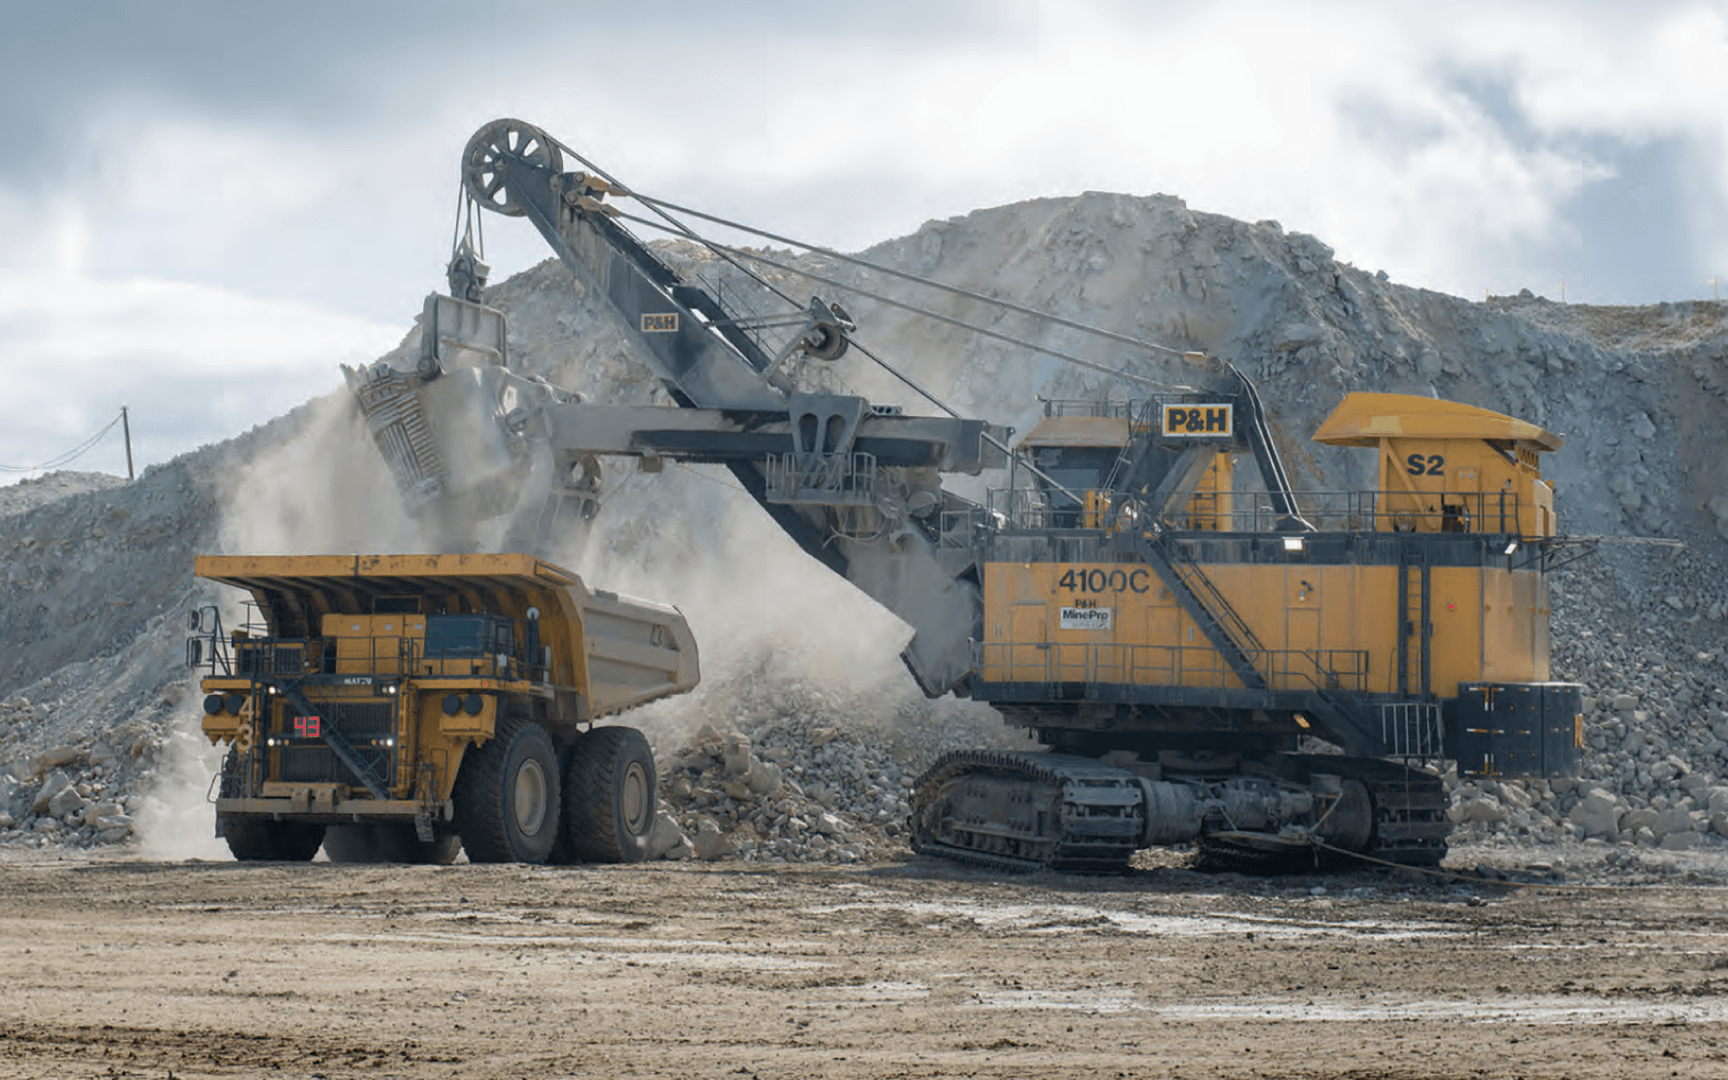 Heavy equipment operating in a mining environment